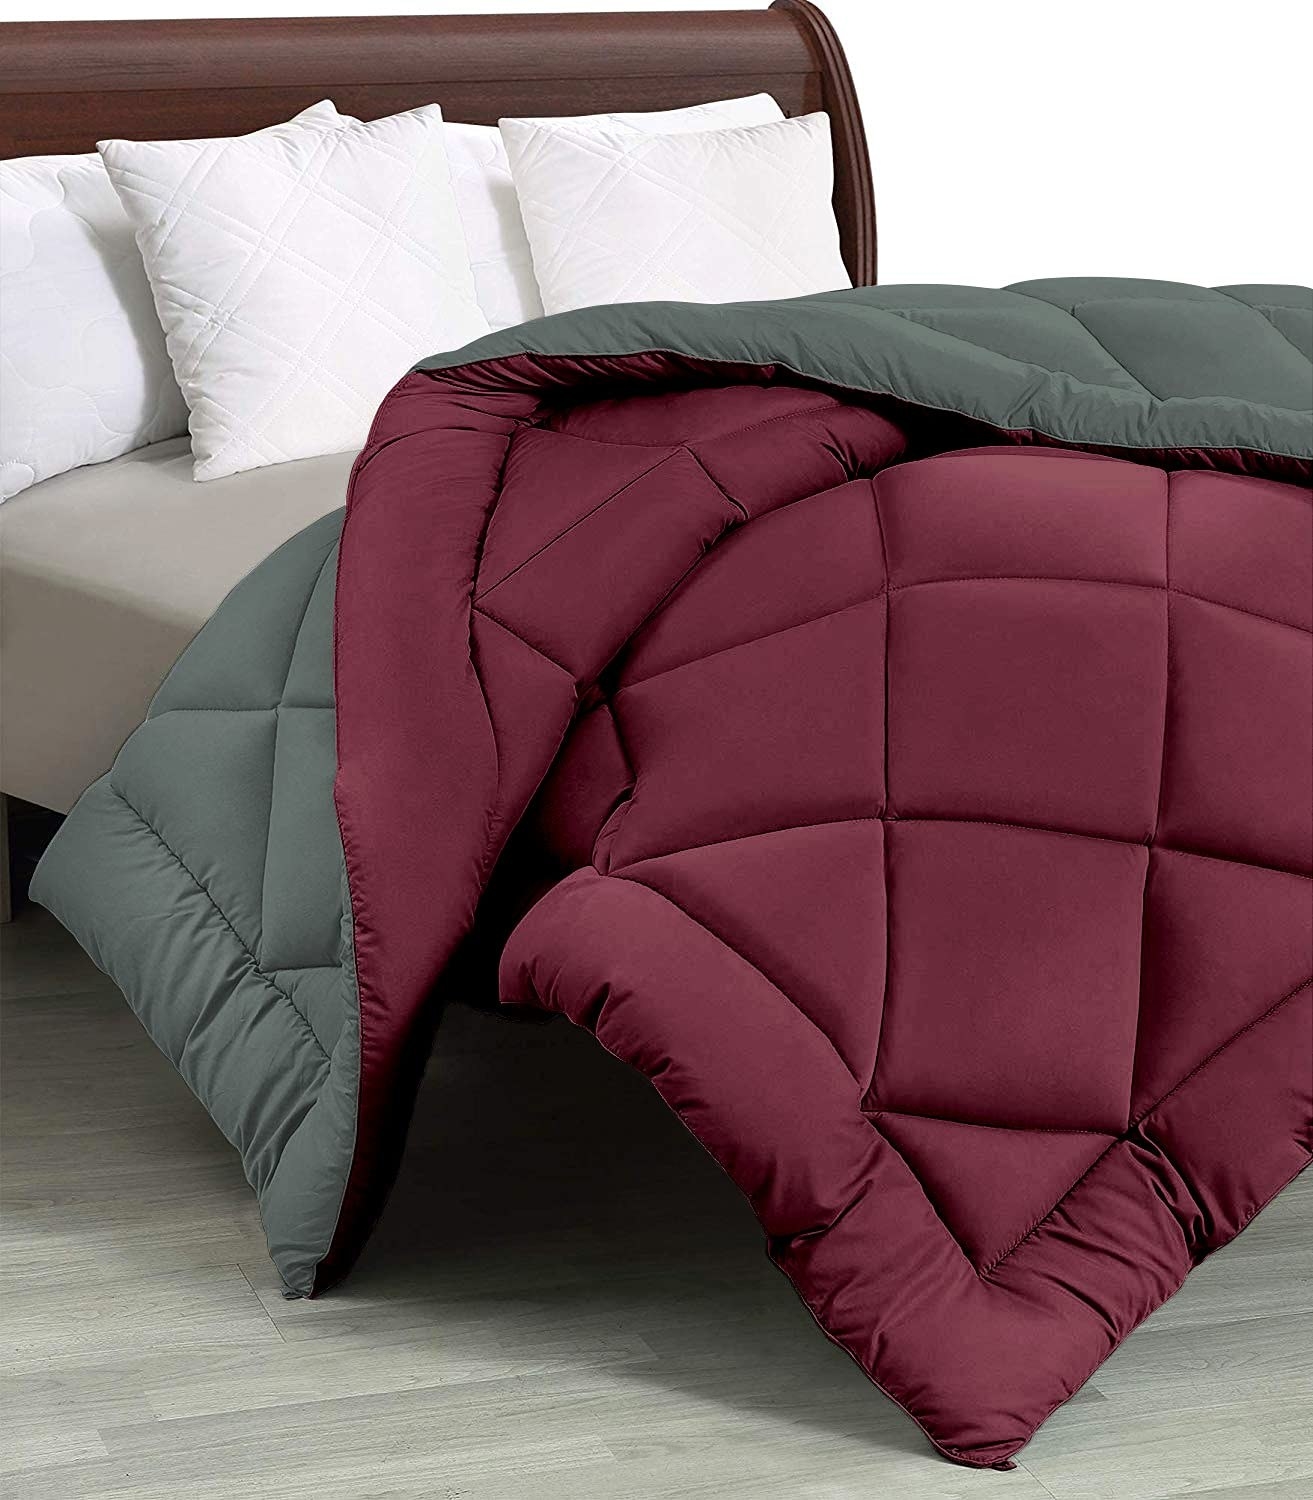 A red and grey comforter on a bed